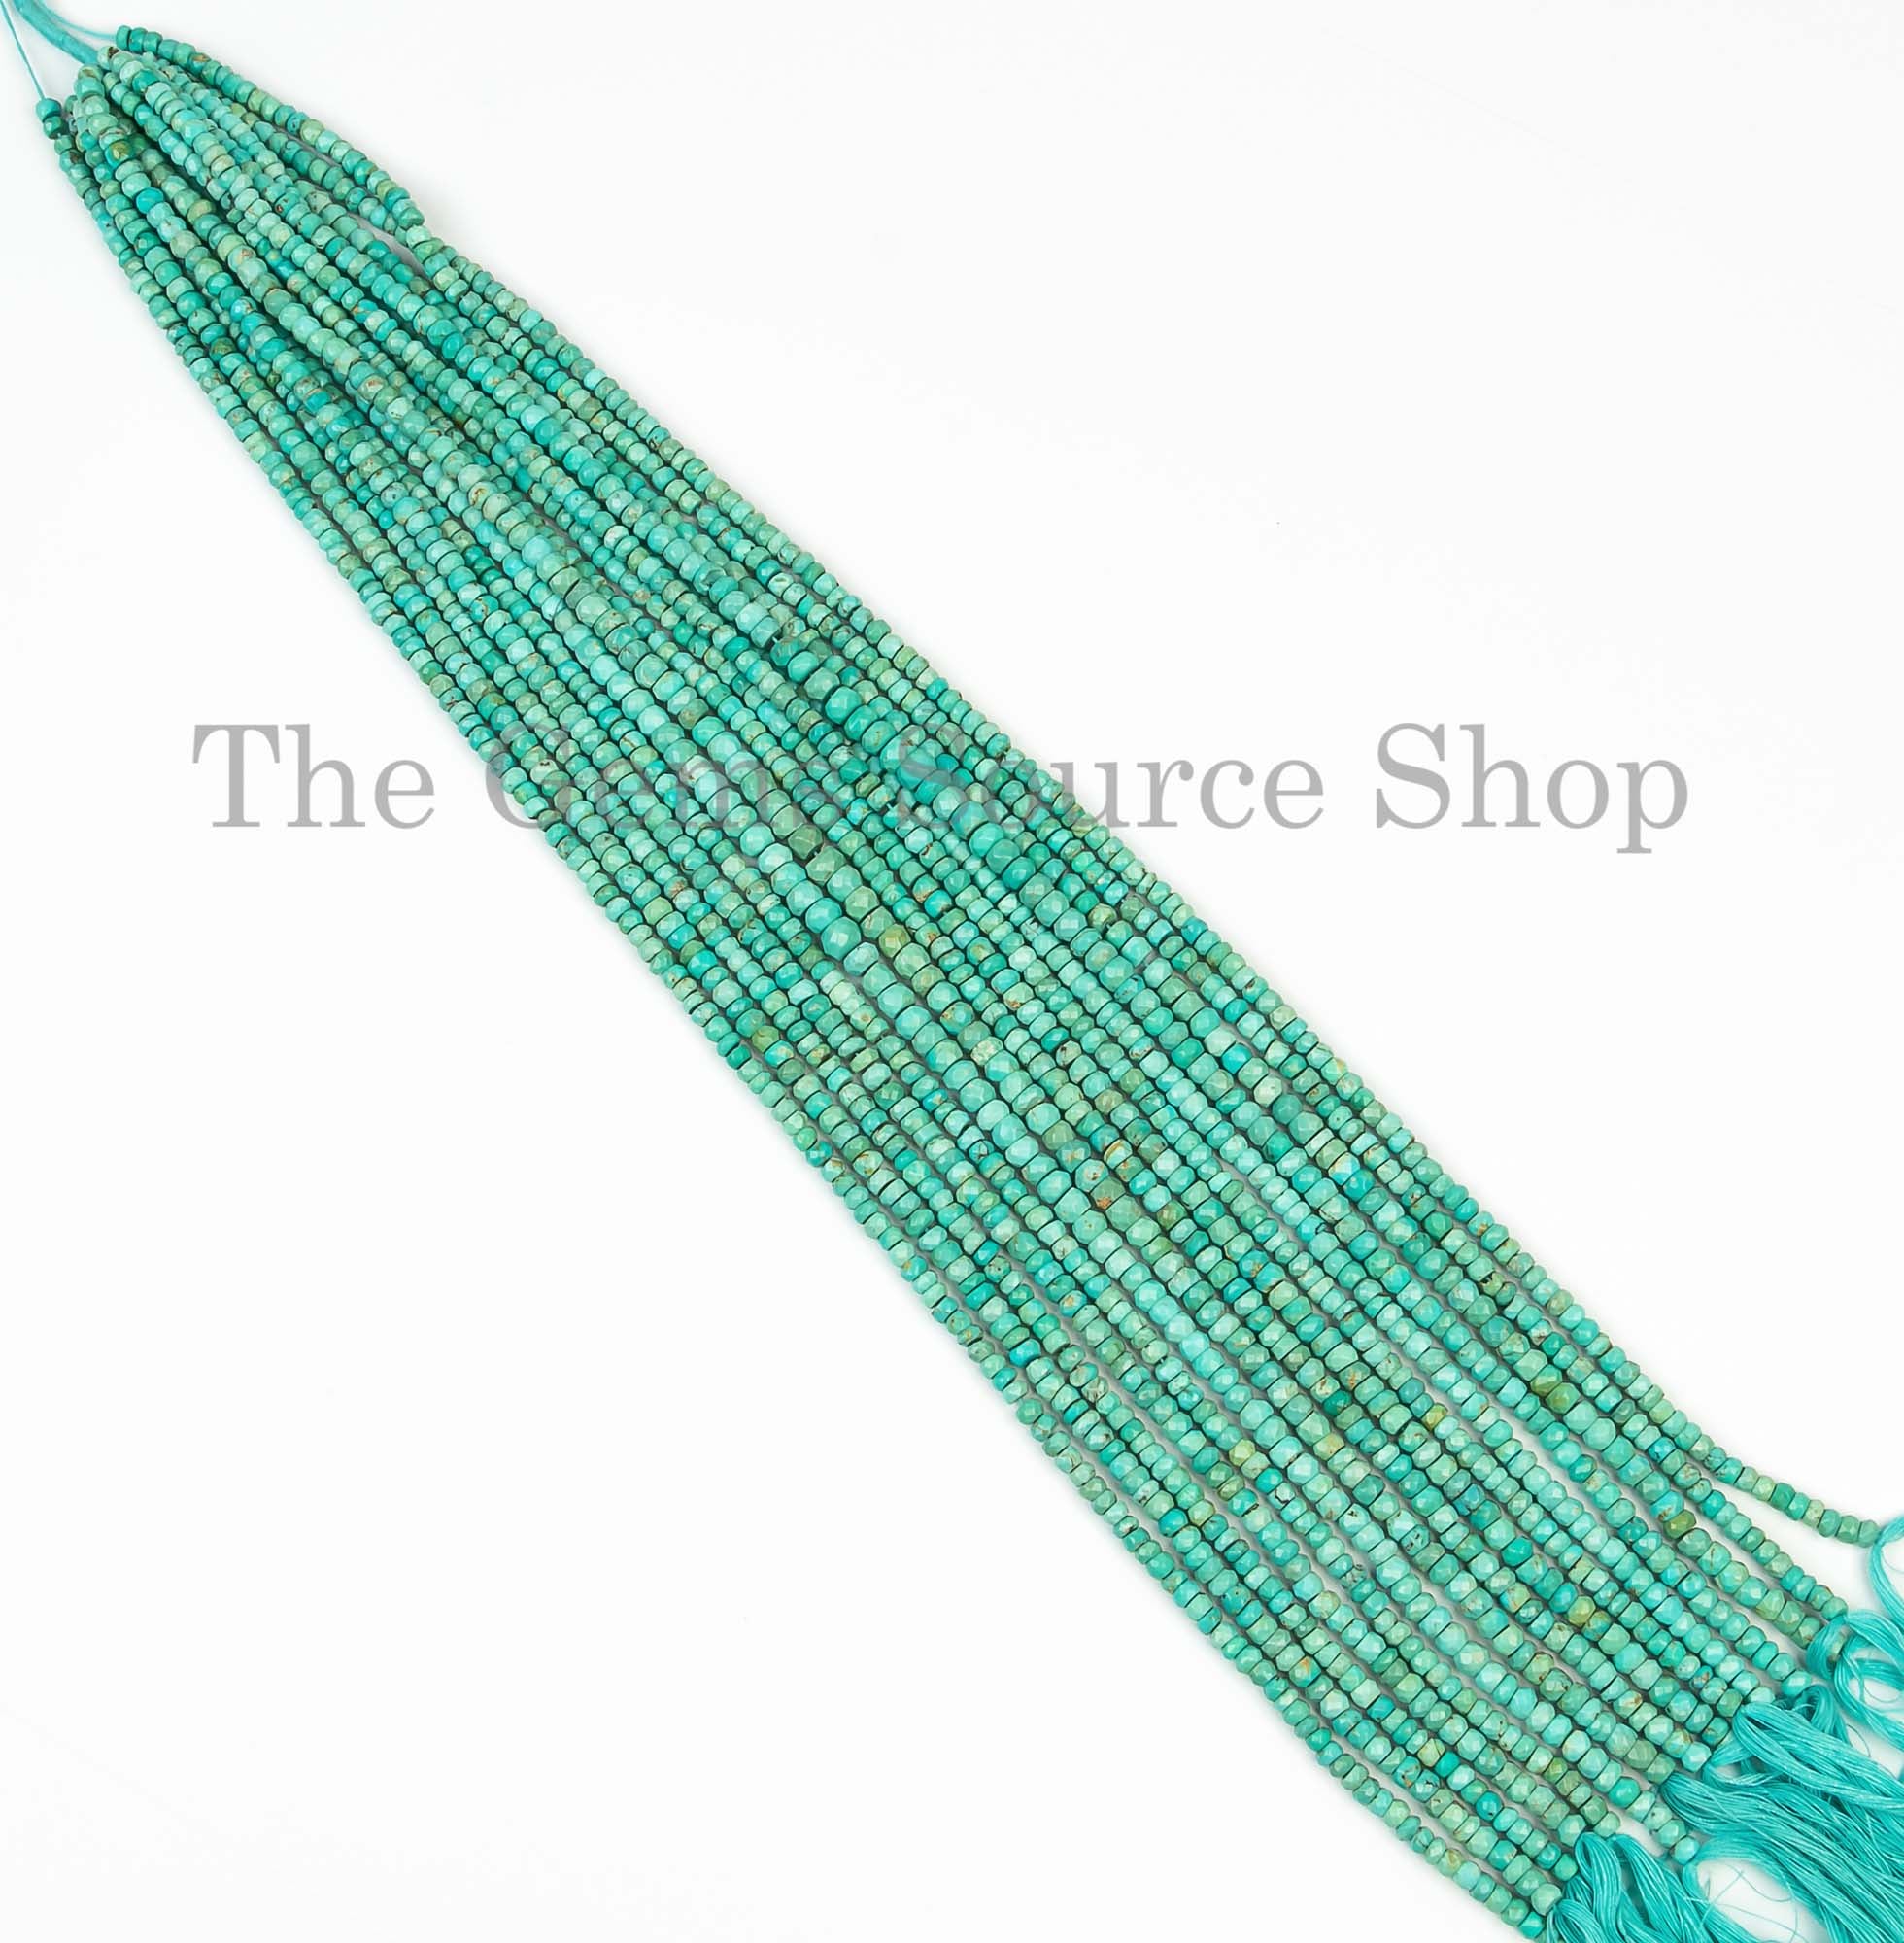 Best Selling Turquoise Beads, Turquoise Faceted Rondelle Beads, Turquoise Gemstone Beads